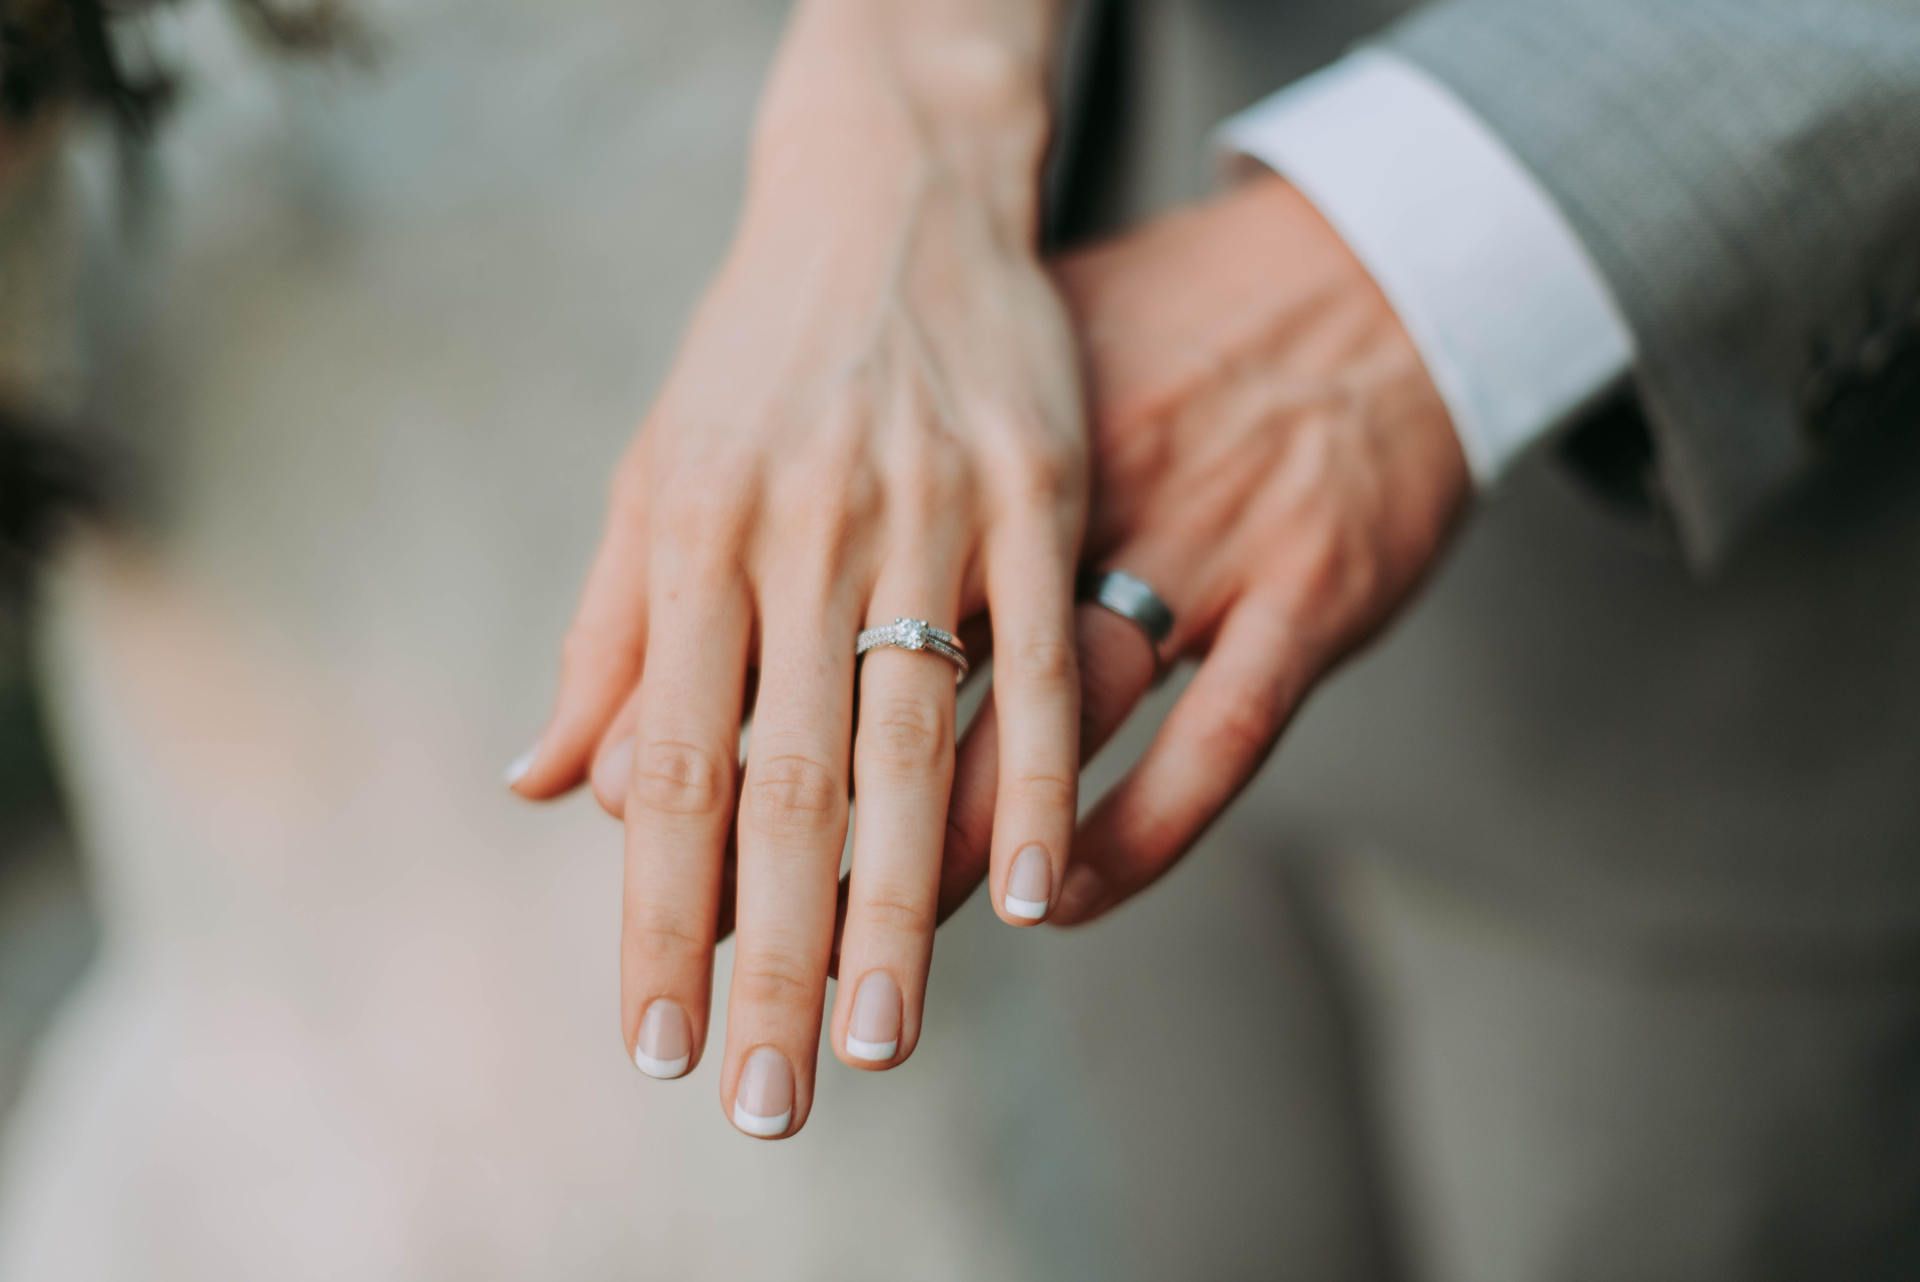 married couple standing next to each other holding out hands with wedding rings on